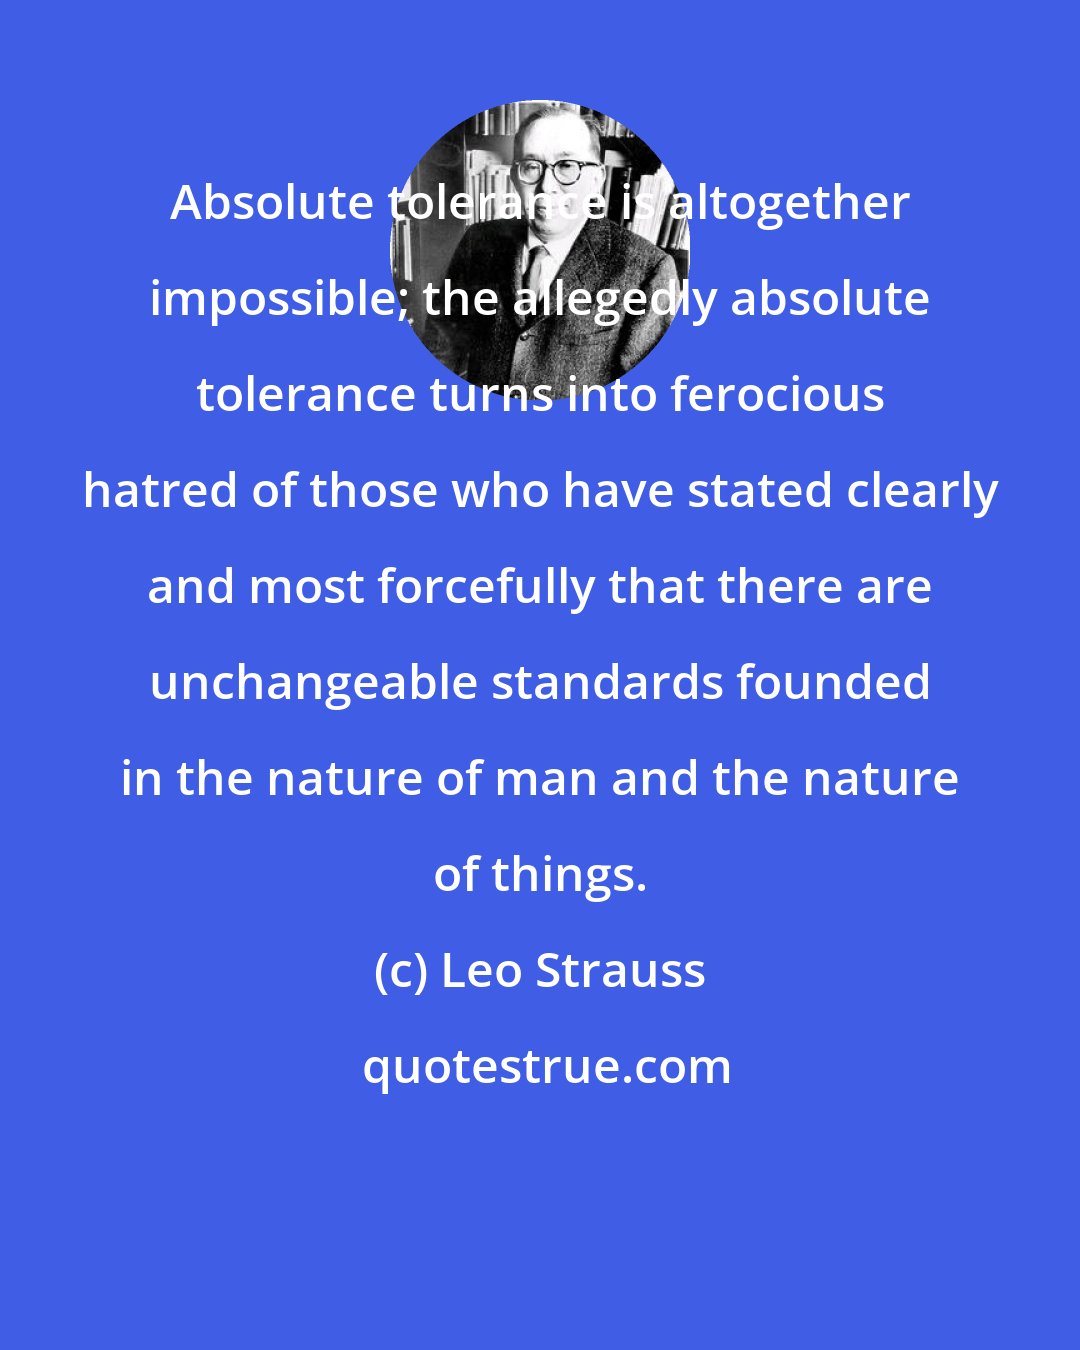 Leo Strauss: Absolute tolerance is altogether impossible; the allegedly absolute tolerance turns into ferocious hatred of those who have stated clearly and most forcefully that there are unchangeable standards founded in the nature of man and the nature of things.